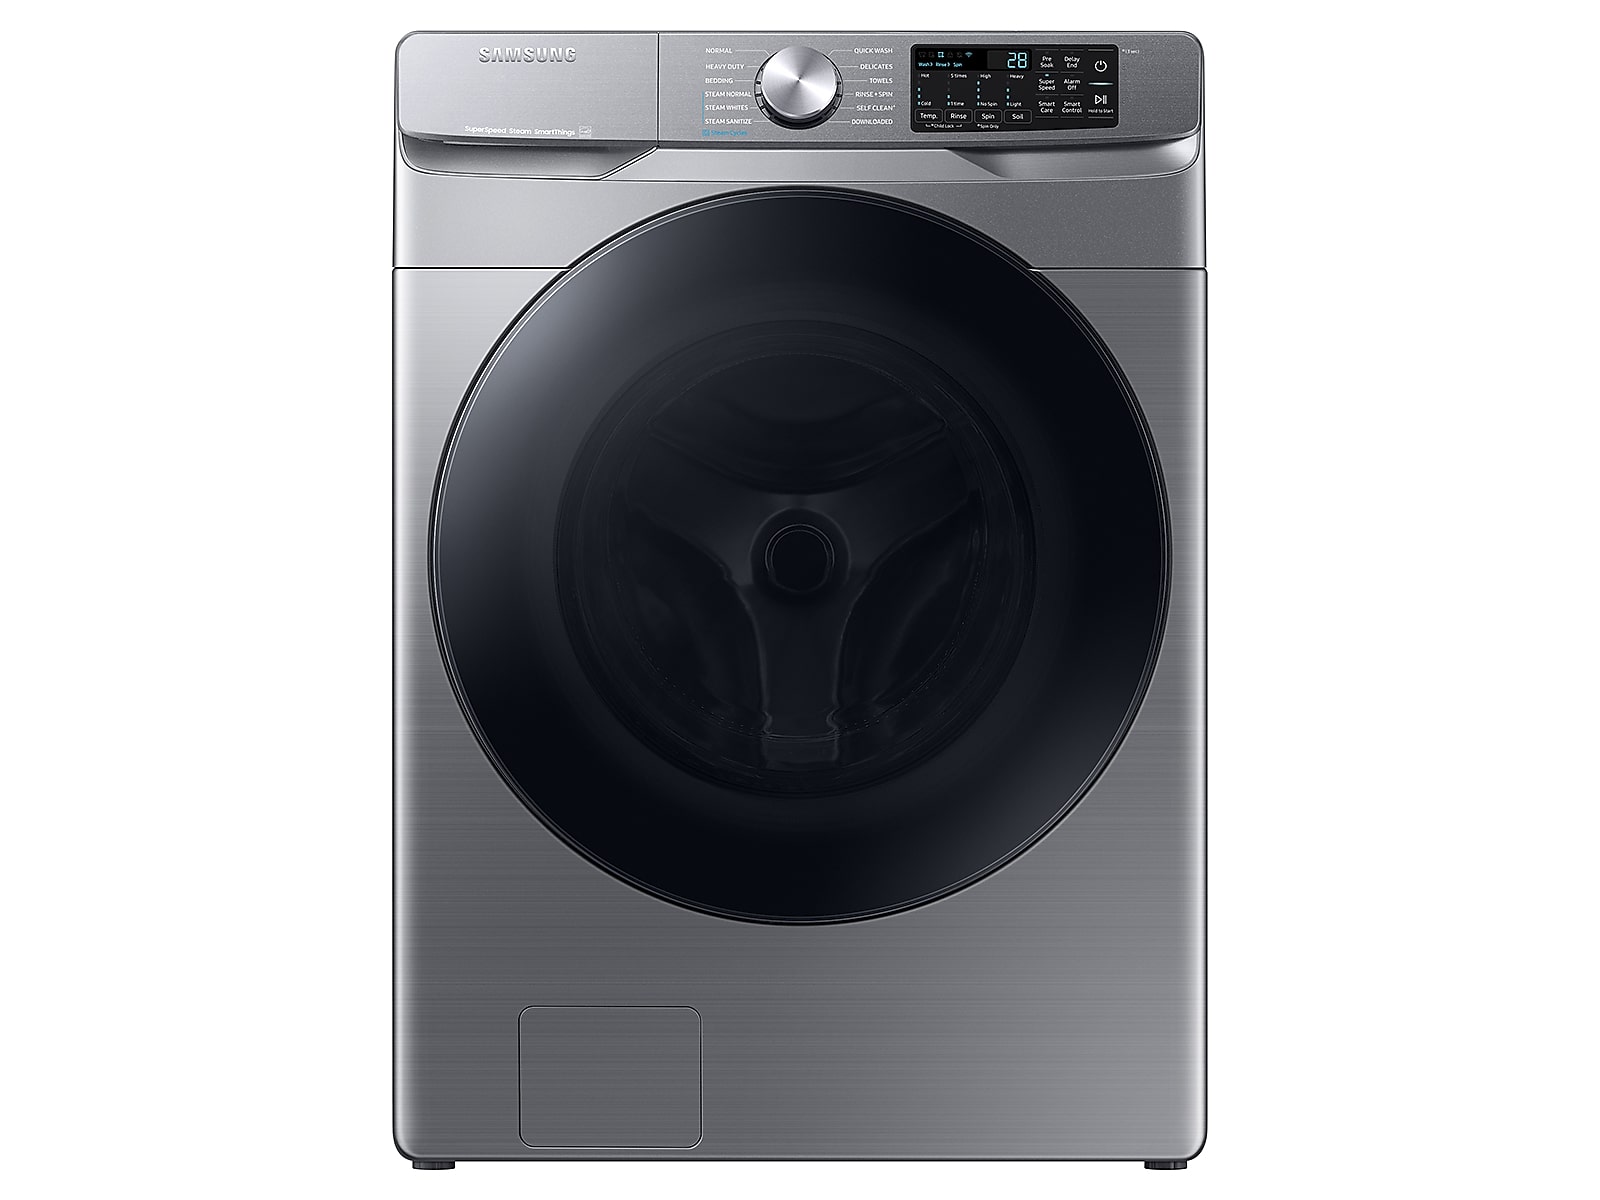 Samsung 4.5 cu. ft. Large Capacity Smart Front Load Washer with Super Speed Wash in Platinum(WF45B6300AP/US) photo